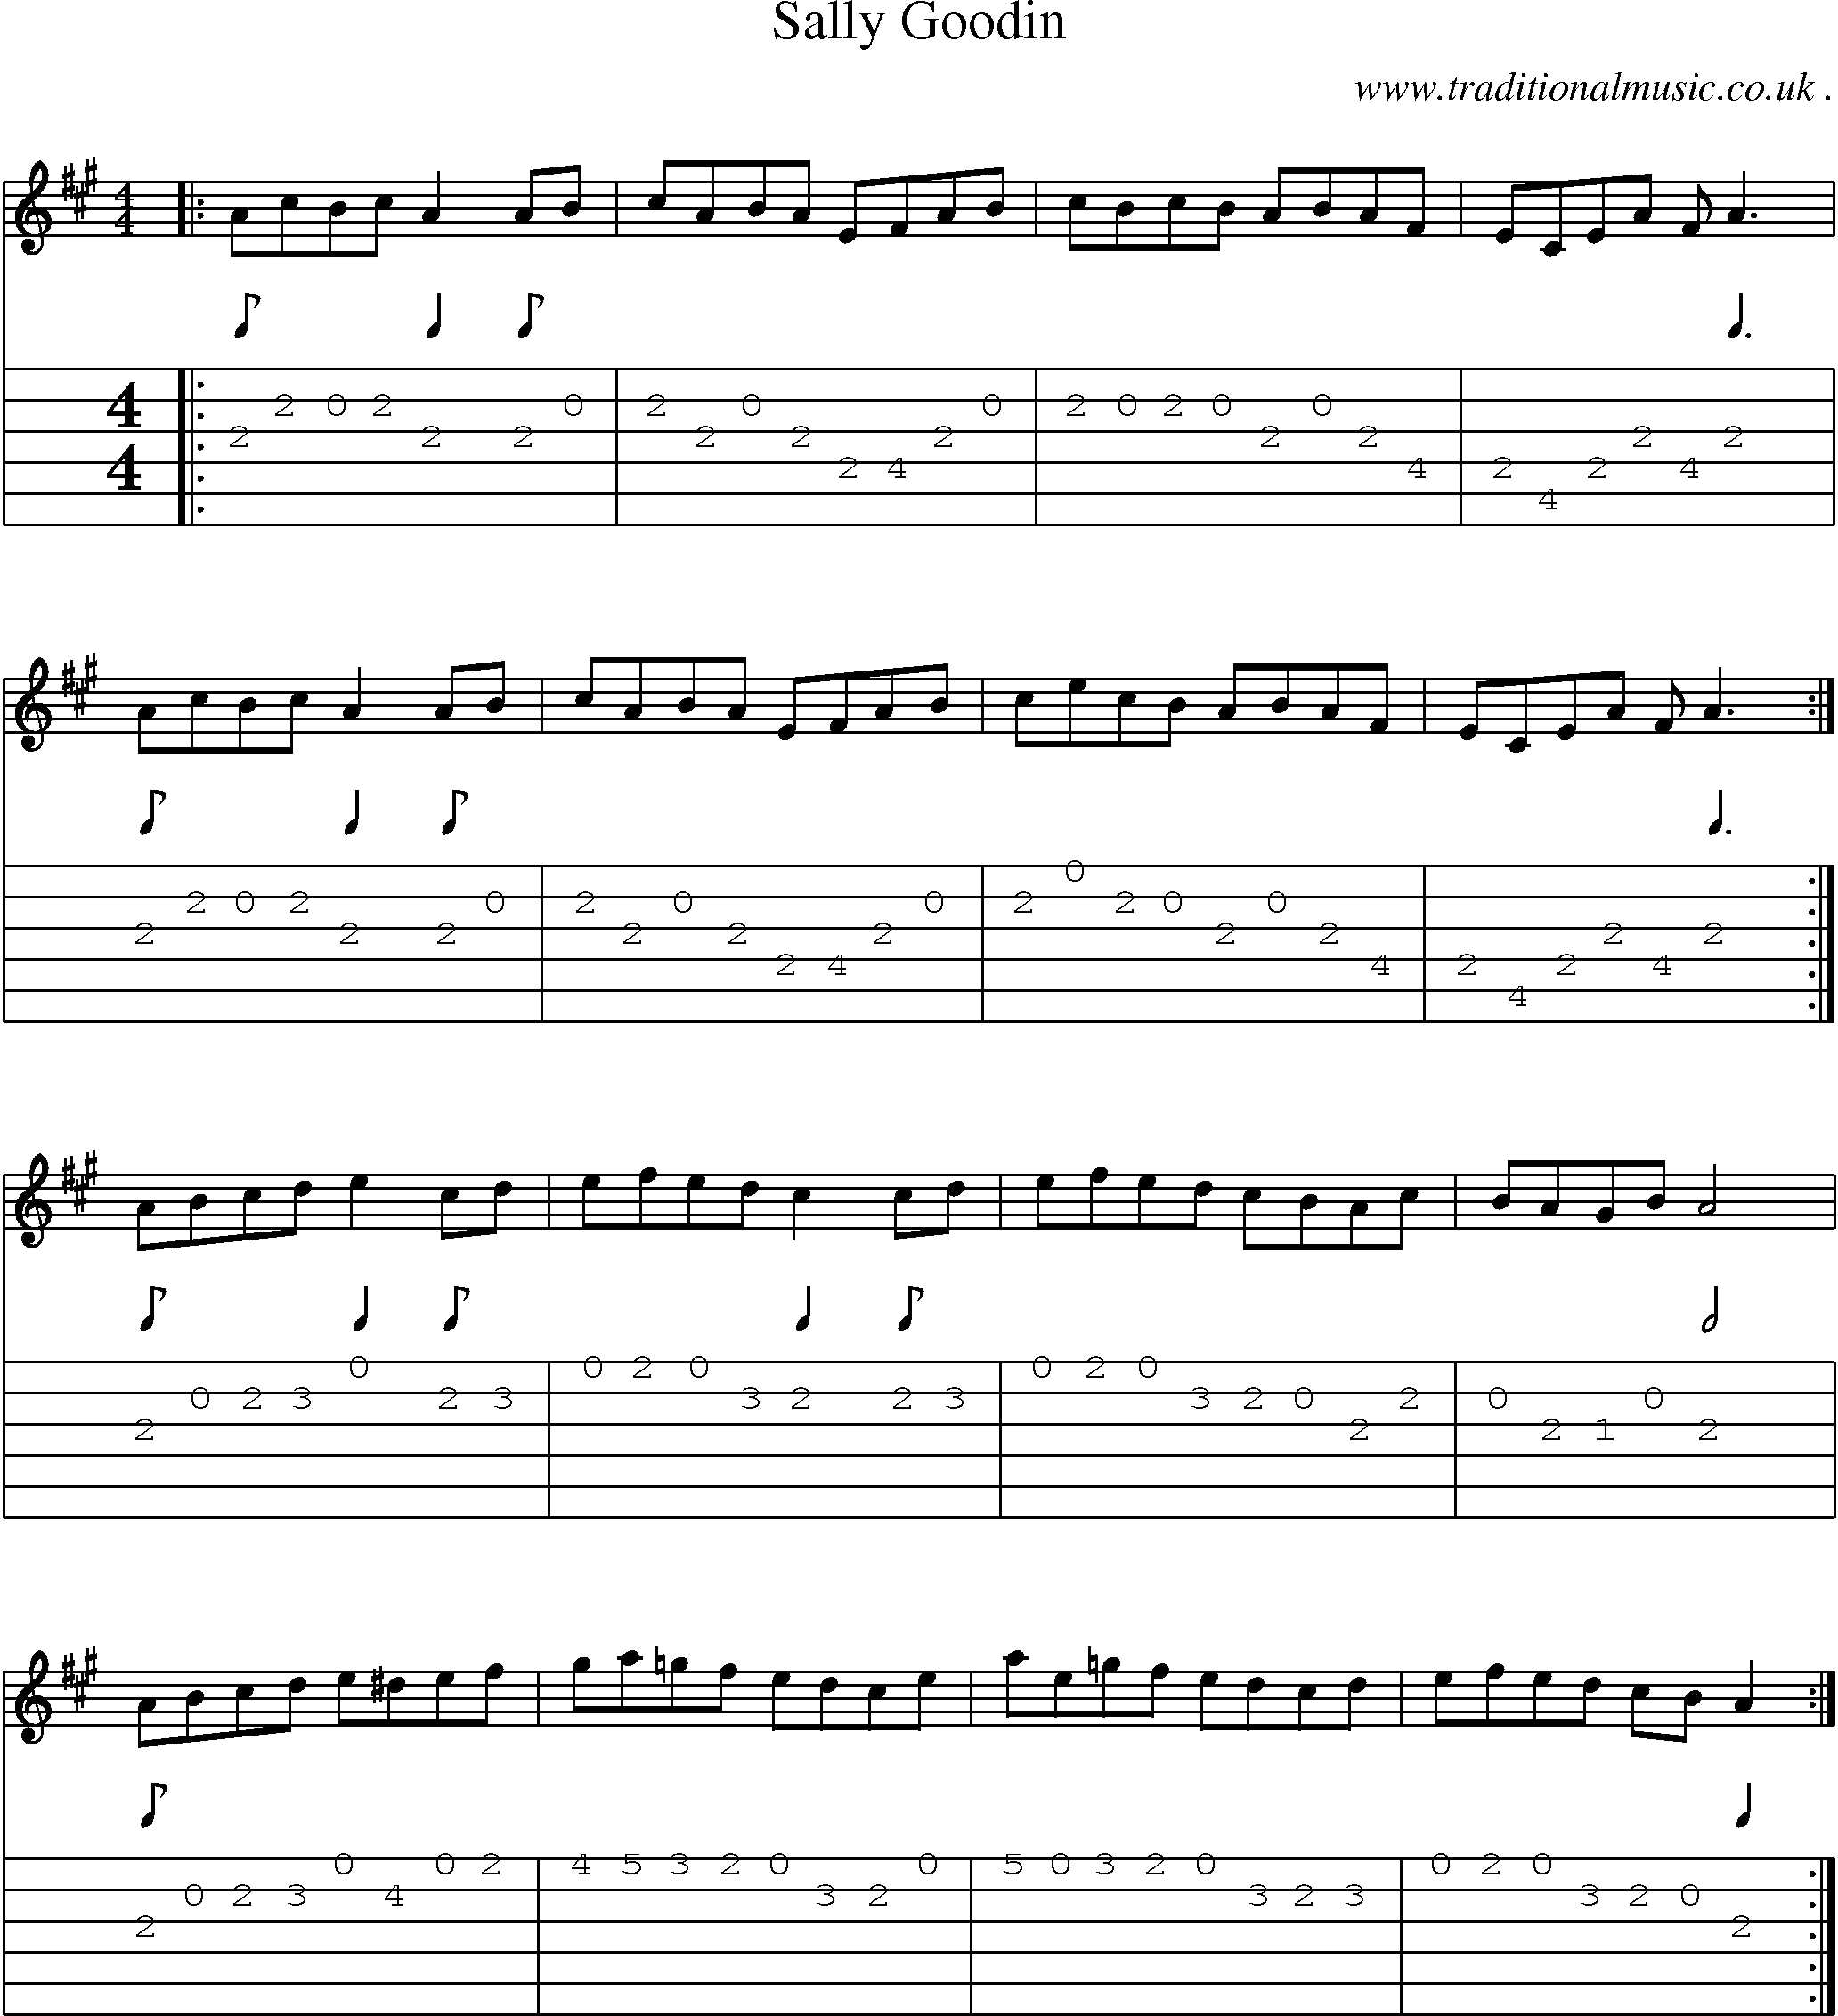 Music Score and Guitar Tabs for Sally Goodin